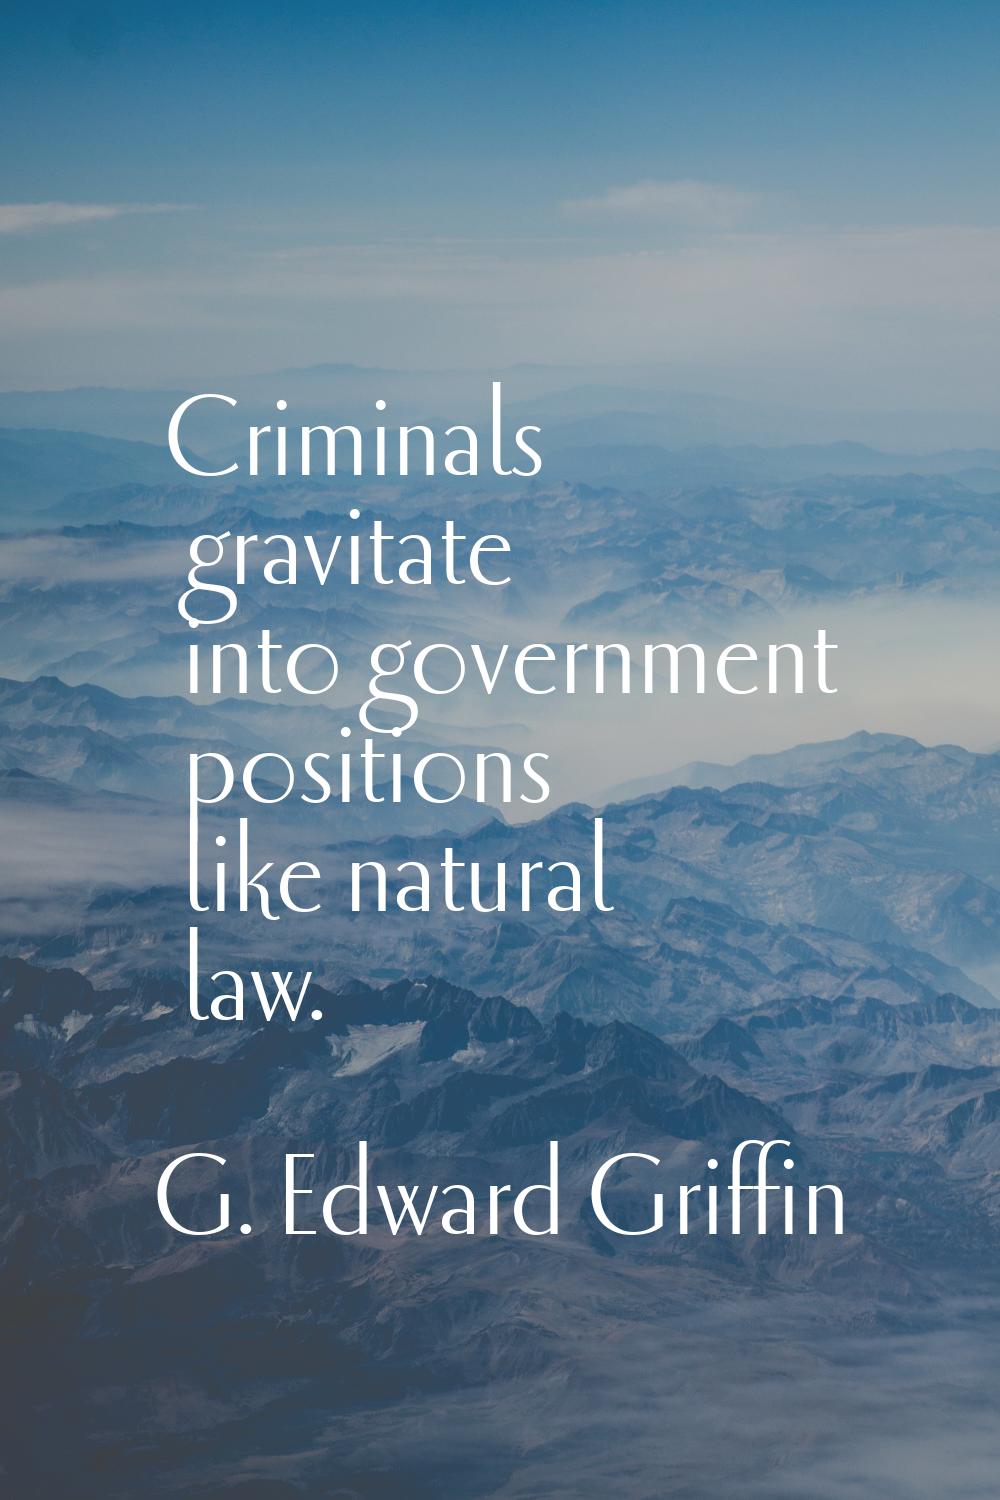 Criminals gravitate into government positions like natural law.